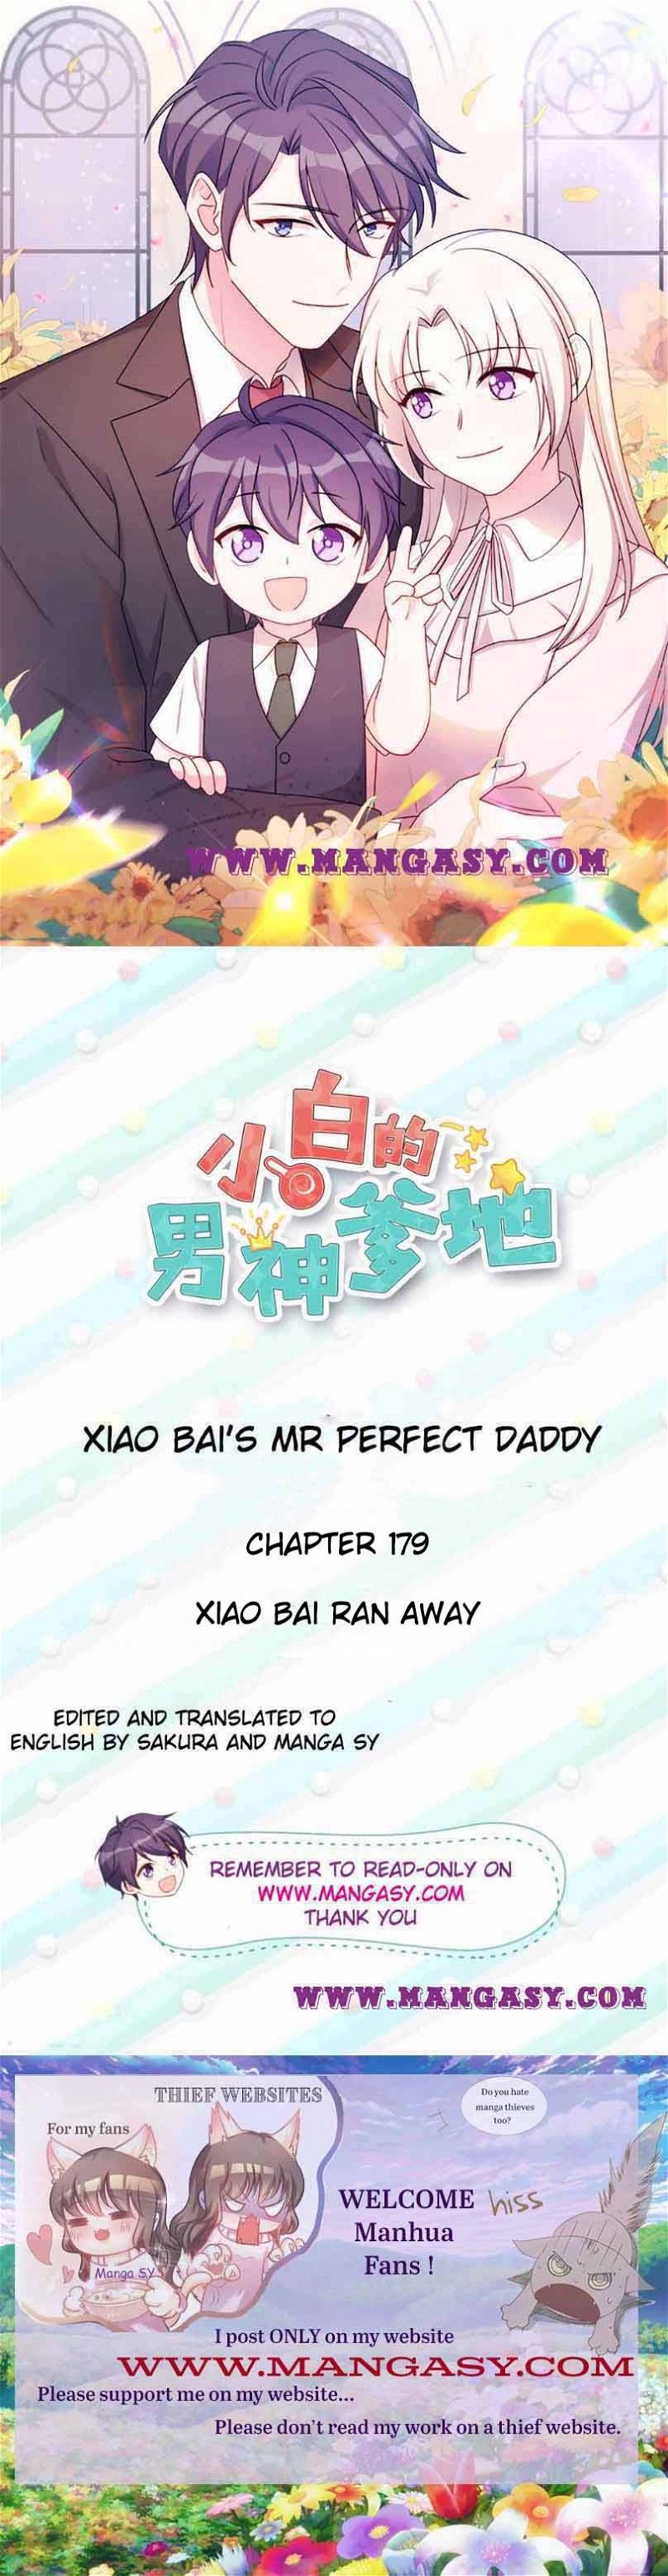 Xiao Bai’s father is a wonderful person Chapter 179 - Page 0